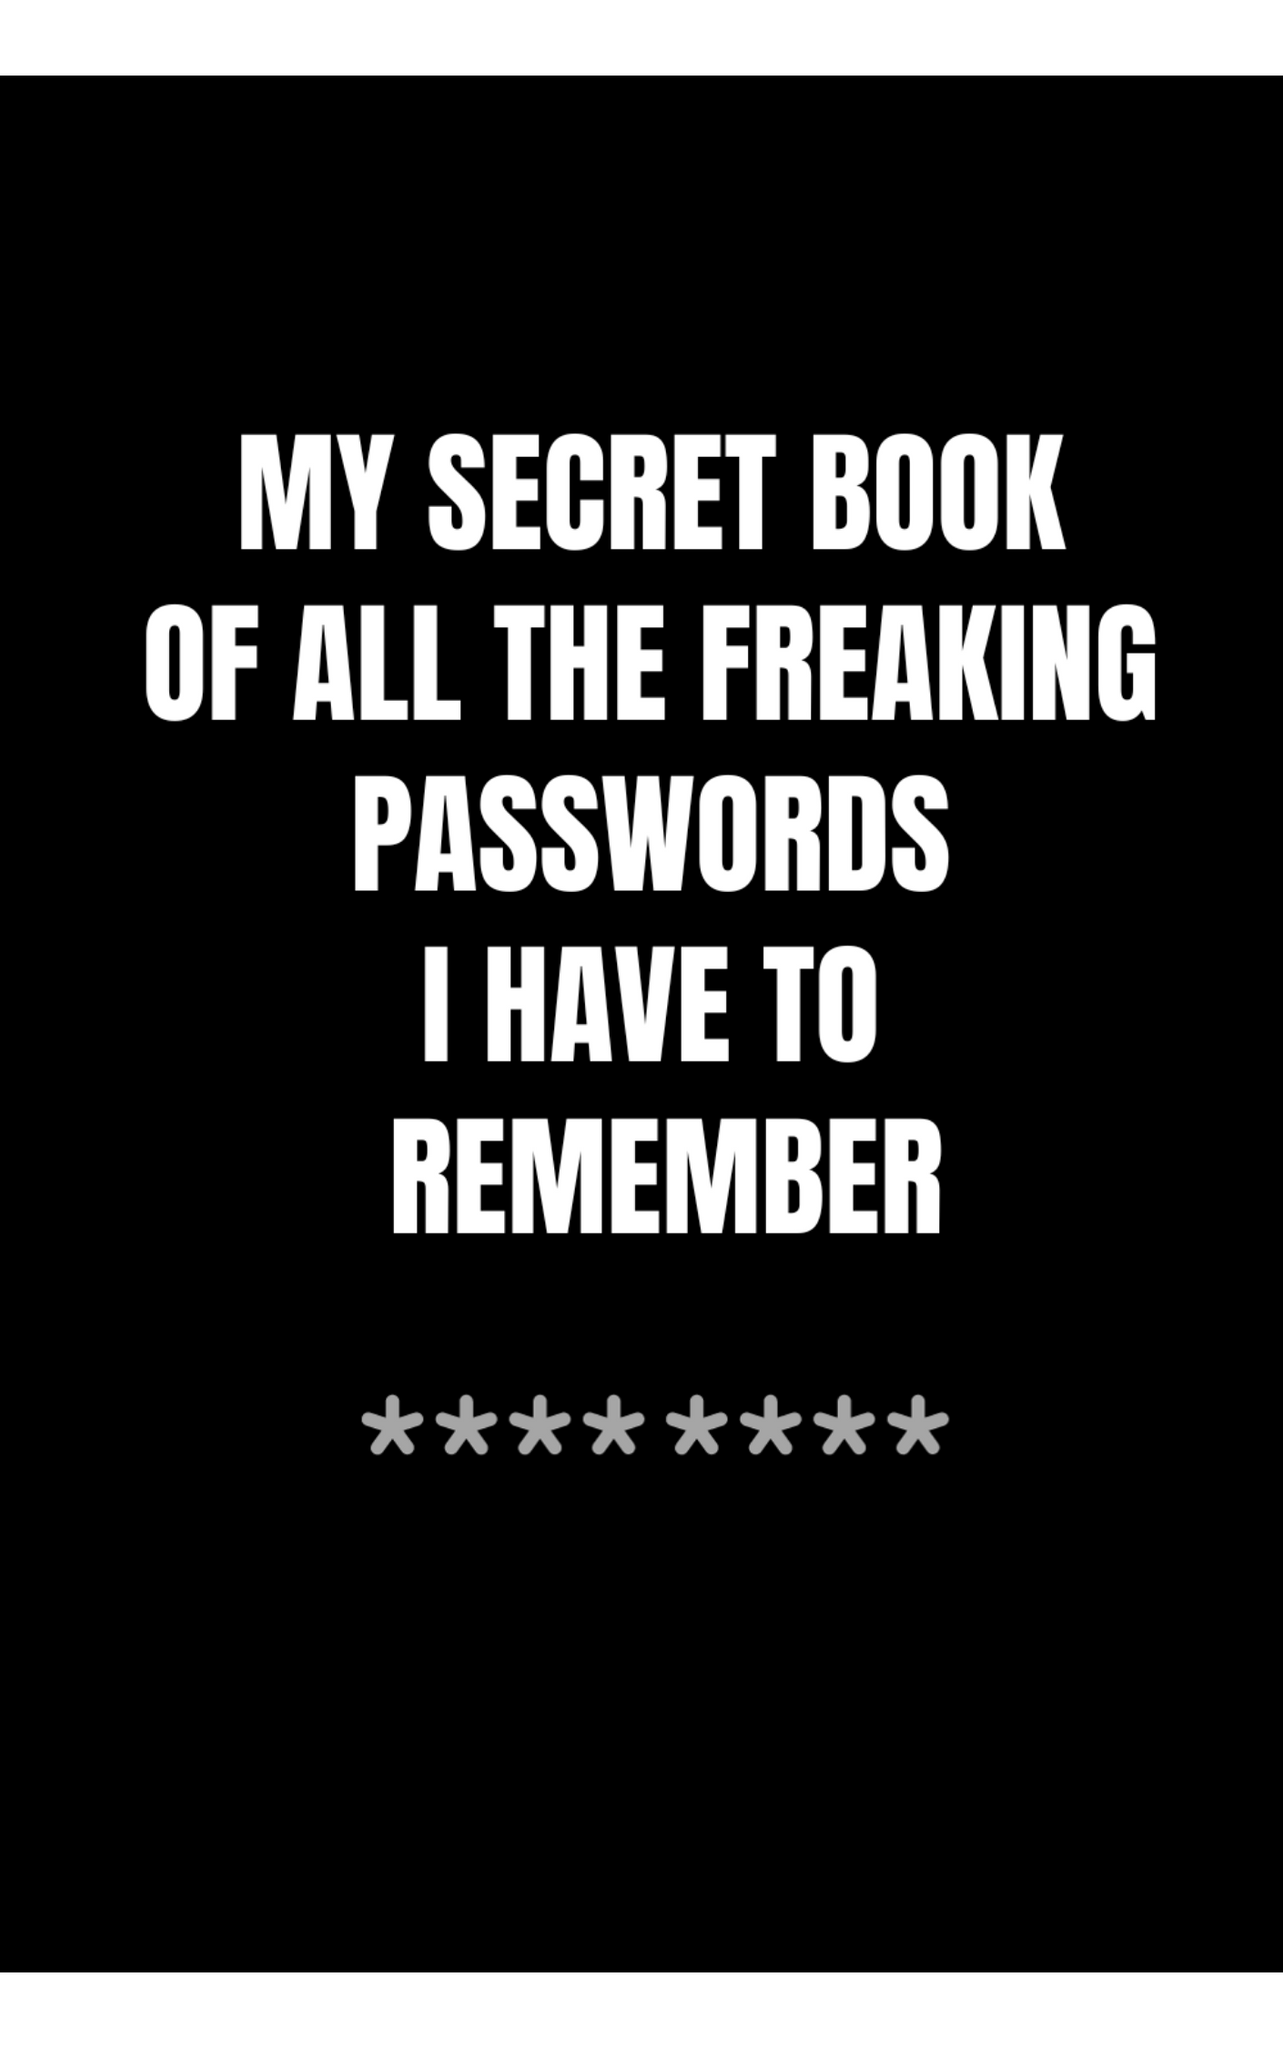 My Secret Book of all the Freaking Passwords I Have to Remember | Password Logbog